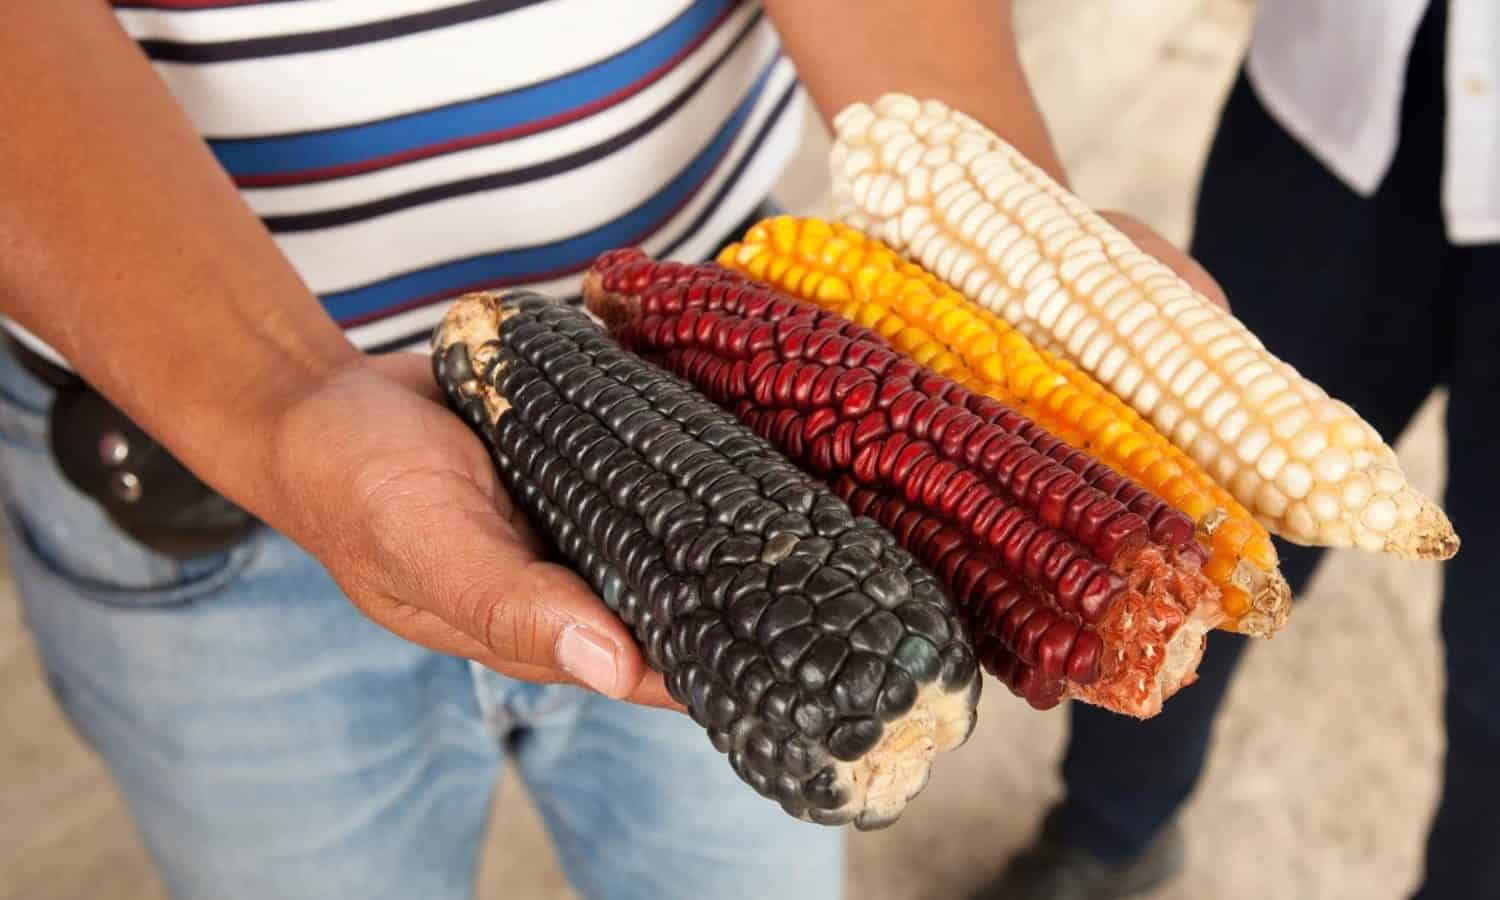 Farmers expected to mobilize in rural Mexico after López Obrador’s victory with the hope to bring more sustainability to agricultural practices.